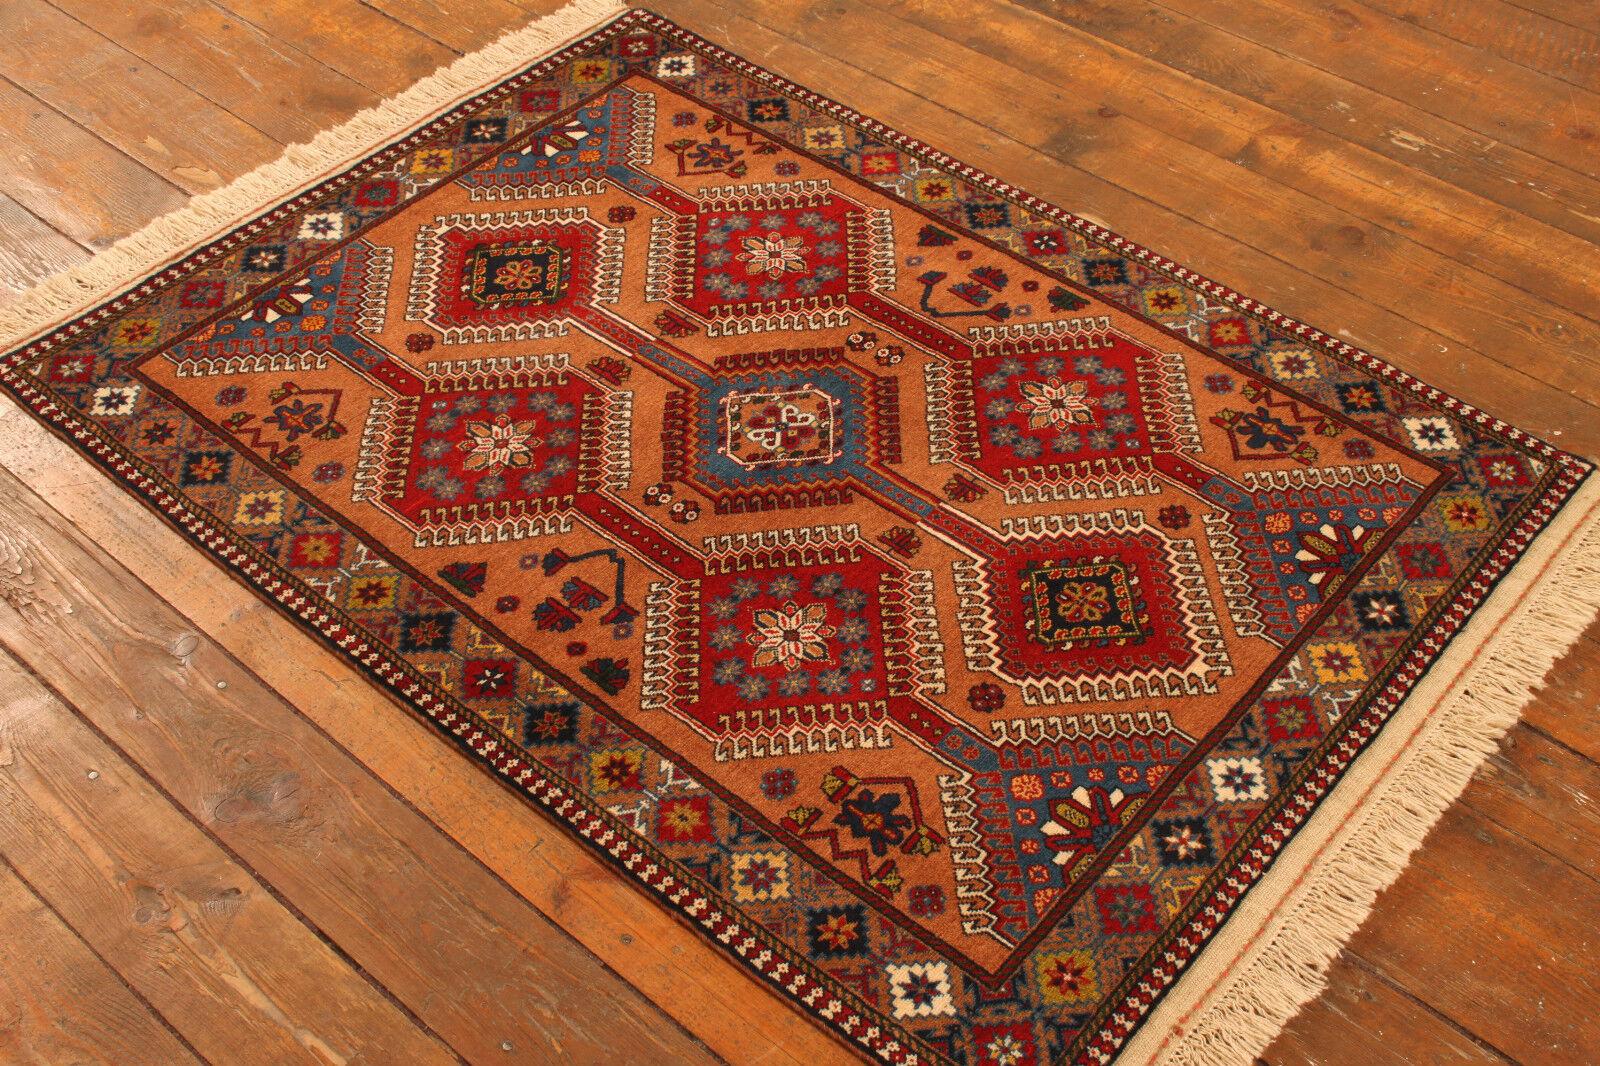 Handmade Vintage Persian Style Yalameh Rug 3.4' x 4.7', 1990s - 1T17 For Sale 1